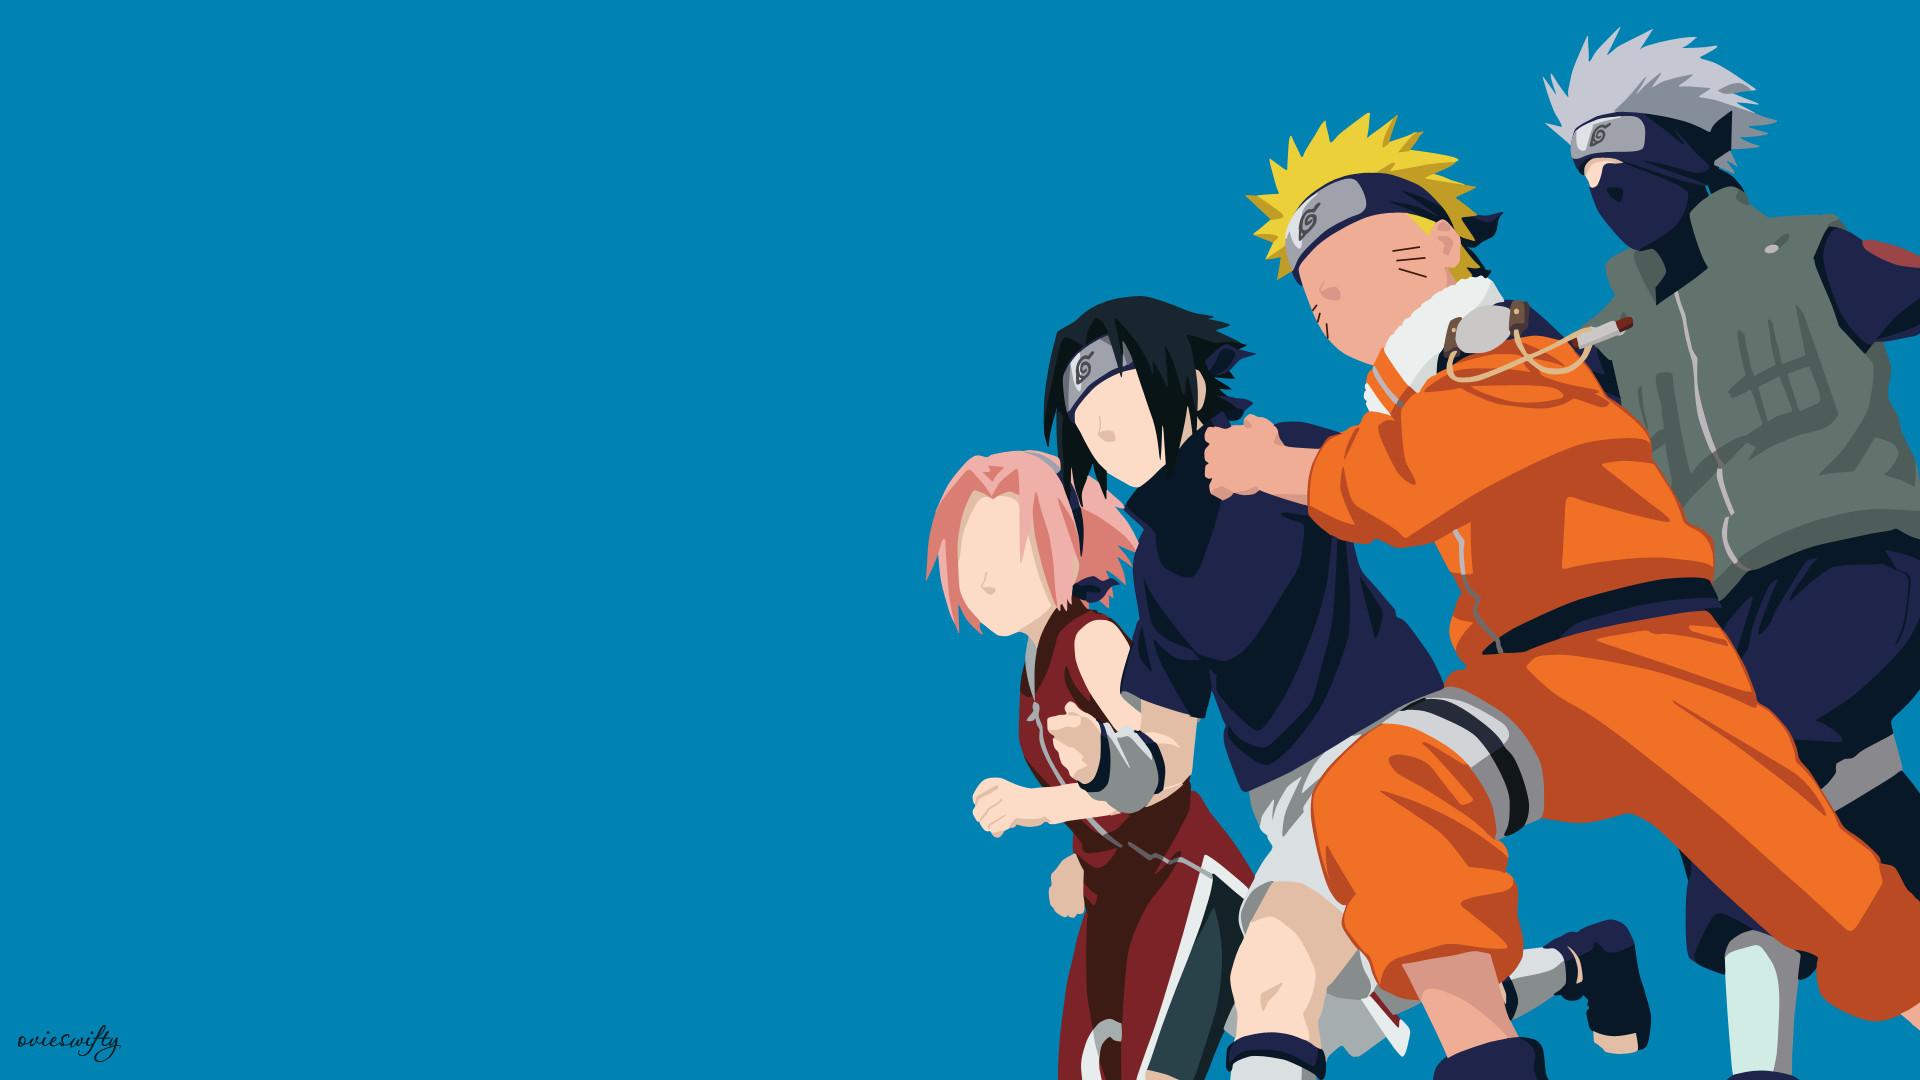 1920x1080 naruto and friends wallpaper download free beautiful wallpapers for your desktop backgrounds, mobile, tablet, laptop in any resolution, 1920x1080 naruto and friends wallpaper - Naruto